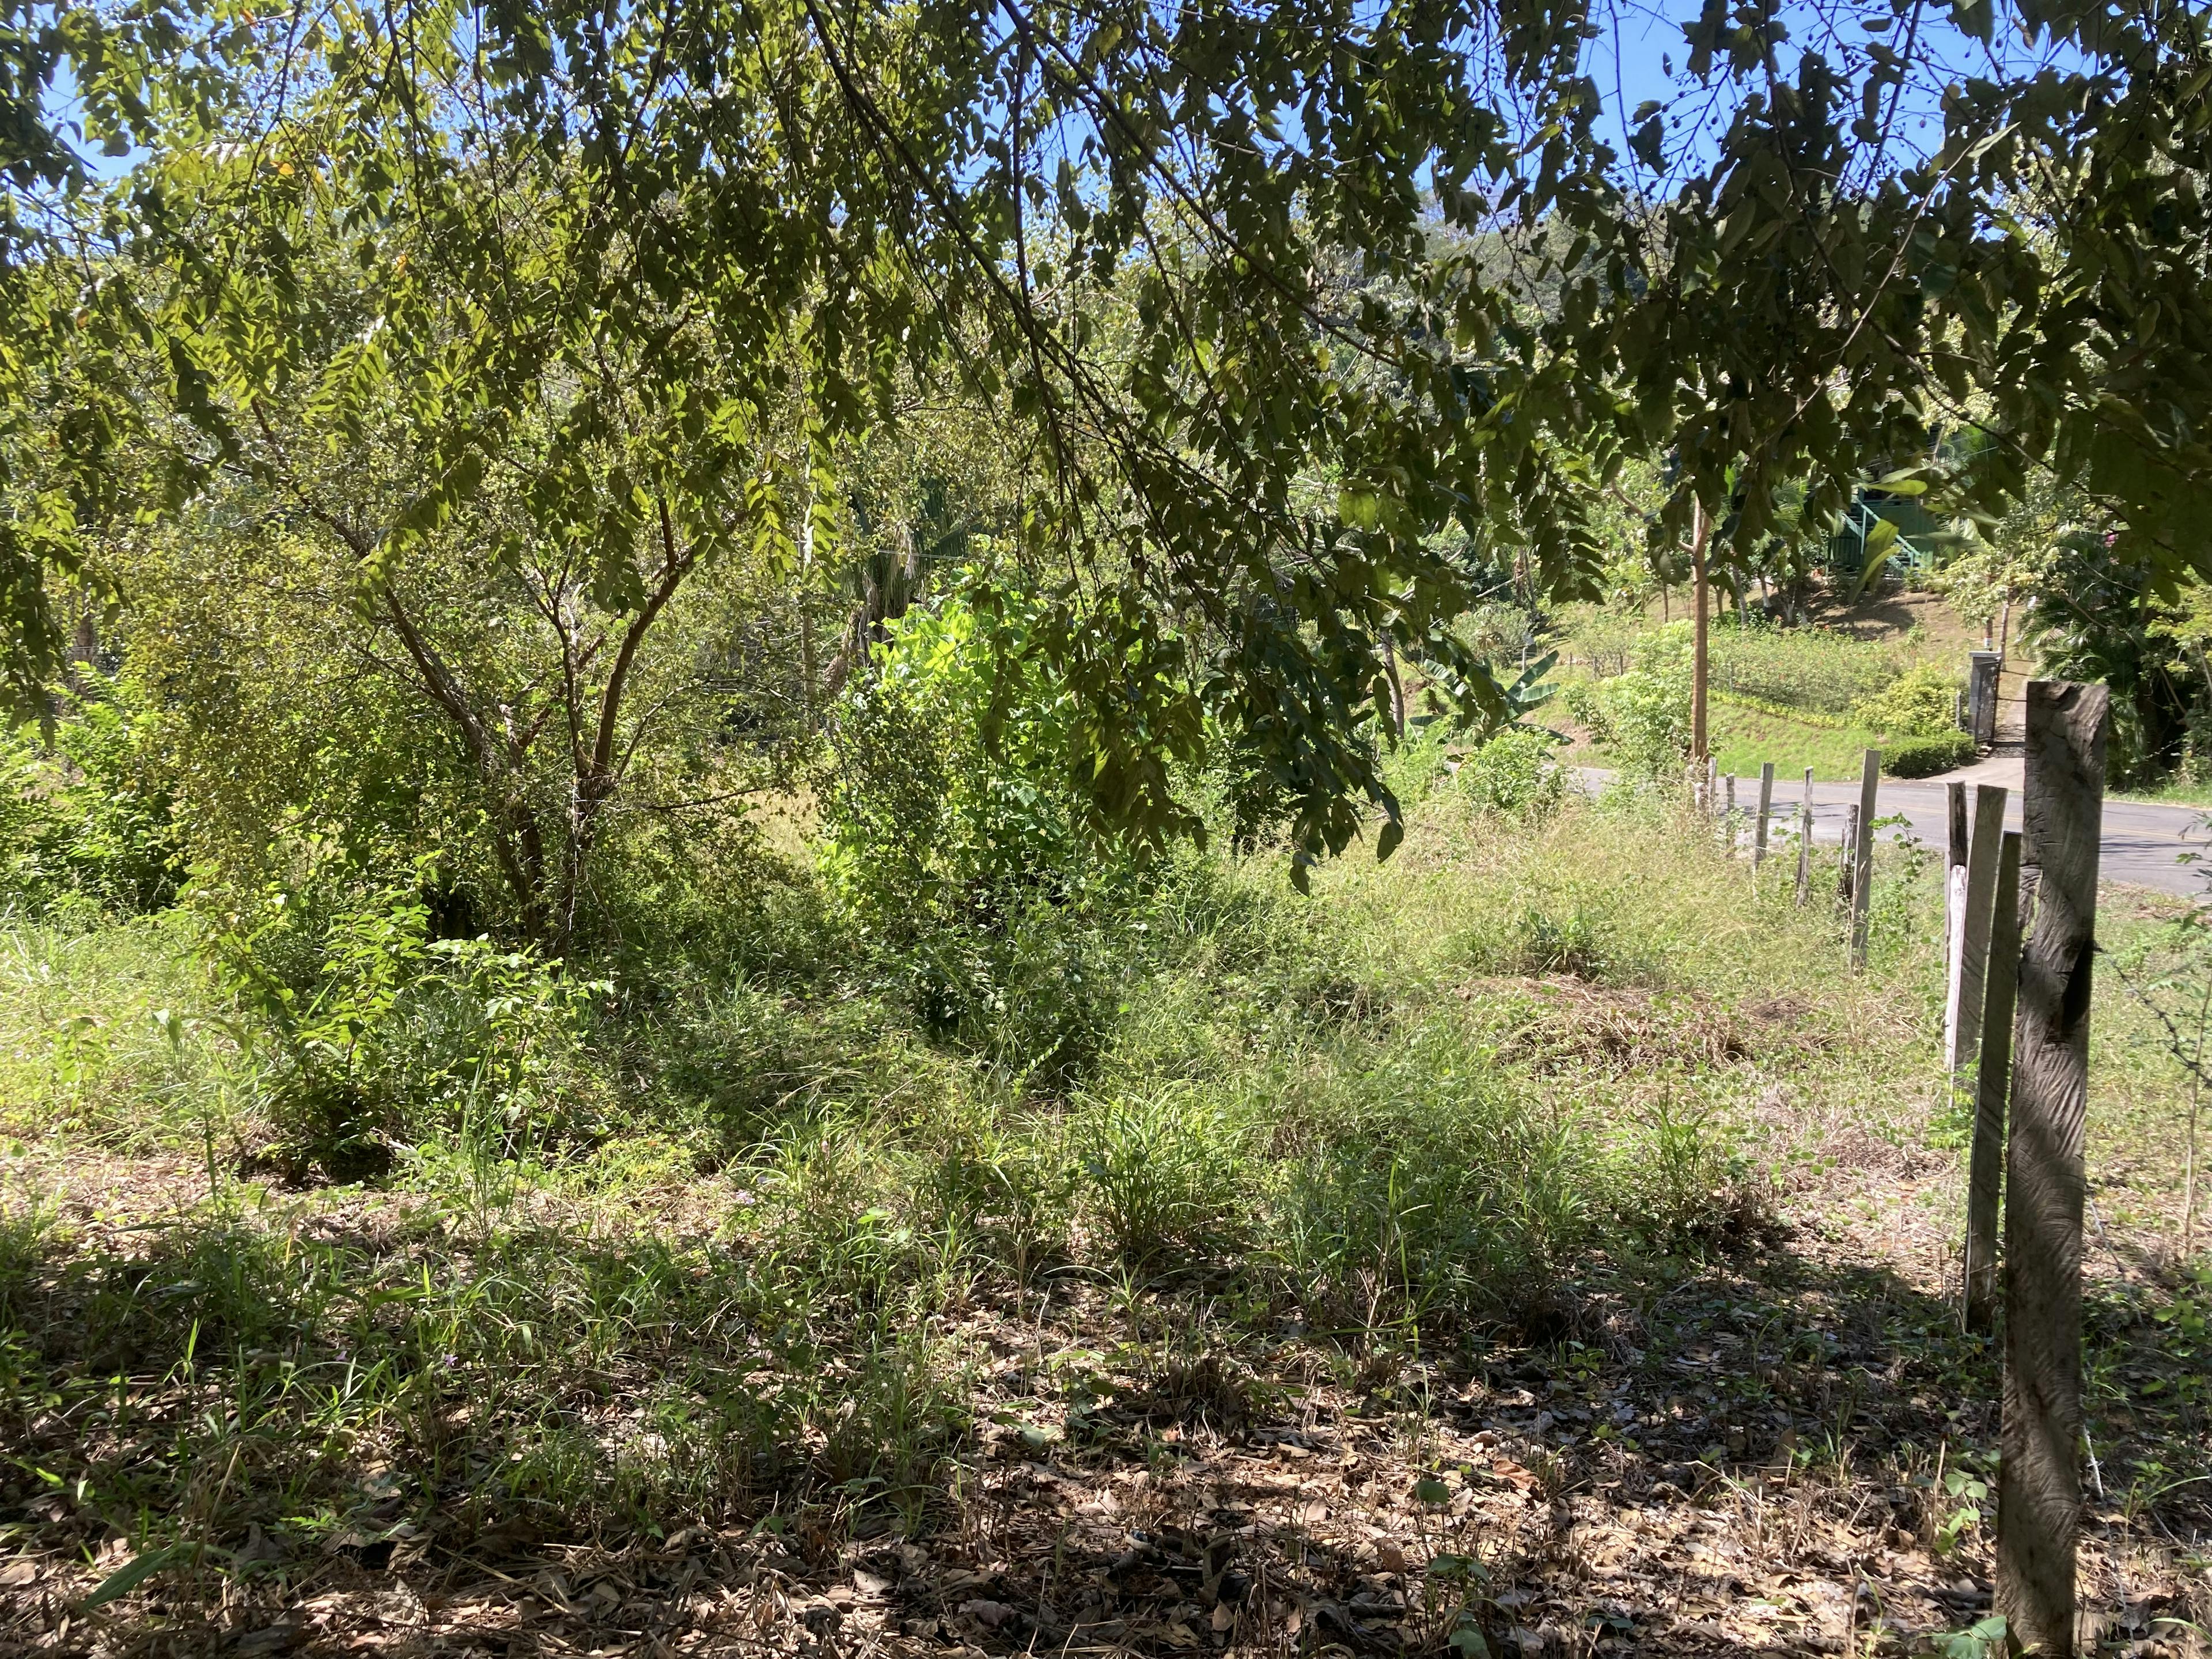 LOT TABACON G - commercial lot ideal for building several houses for arbnb